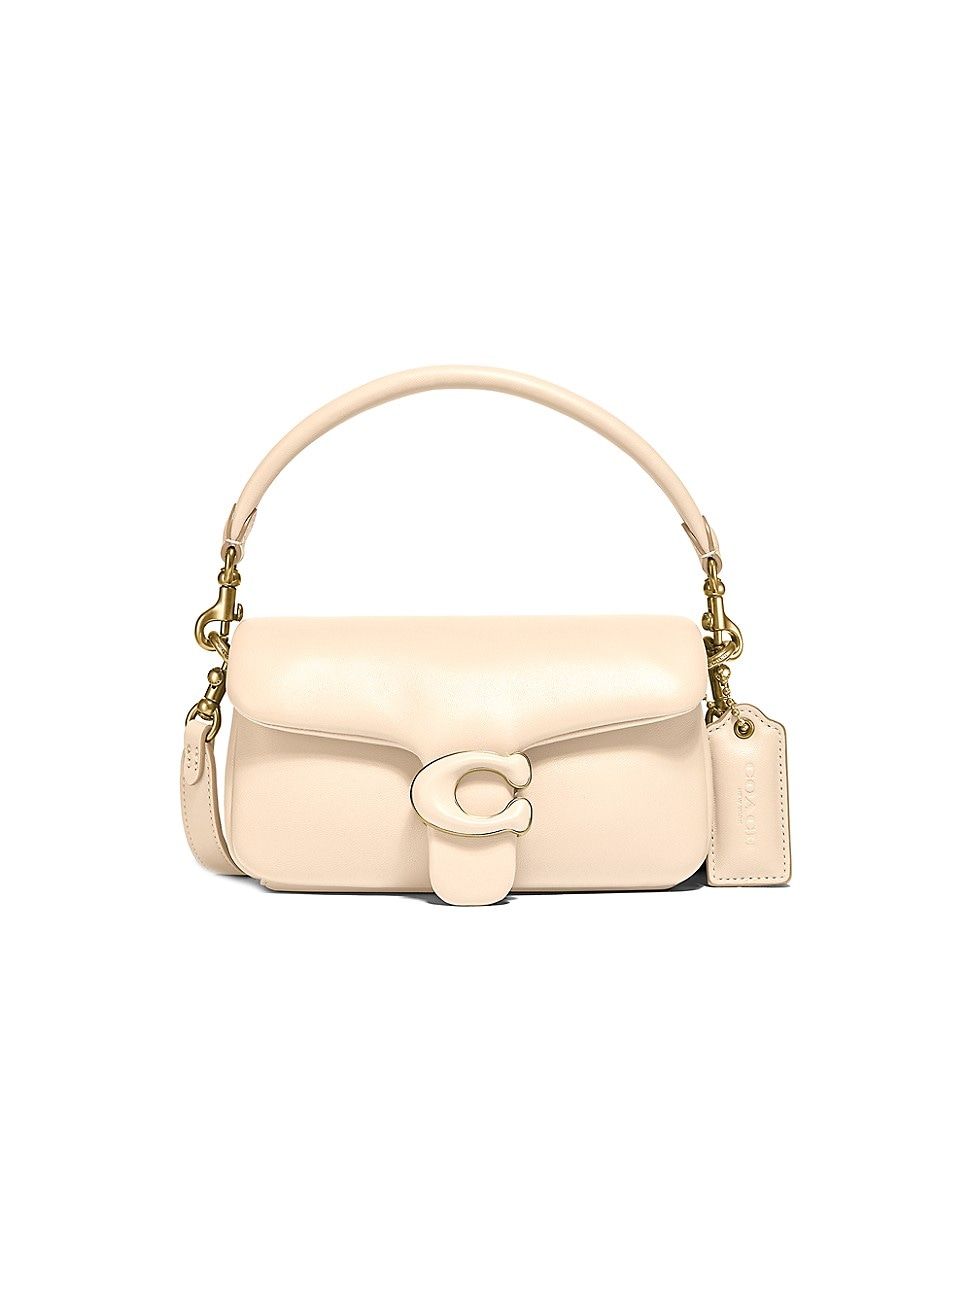 COACH Pillow Tabby 18 Leather Shoulder Bag | Saks Fifth Avenue